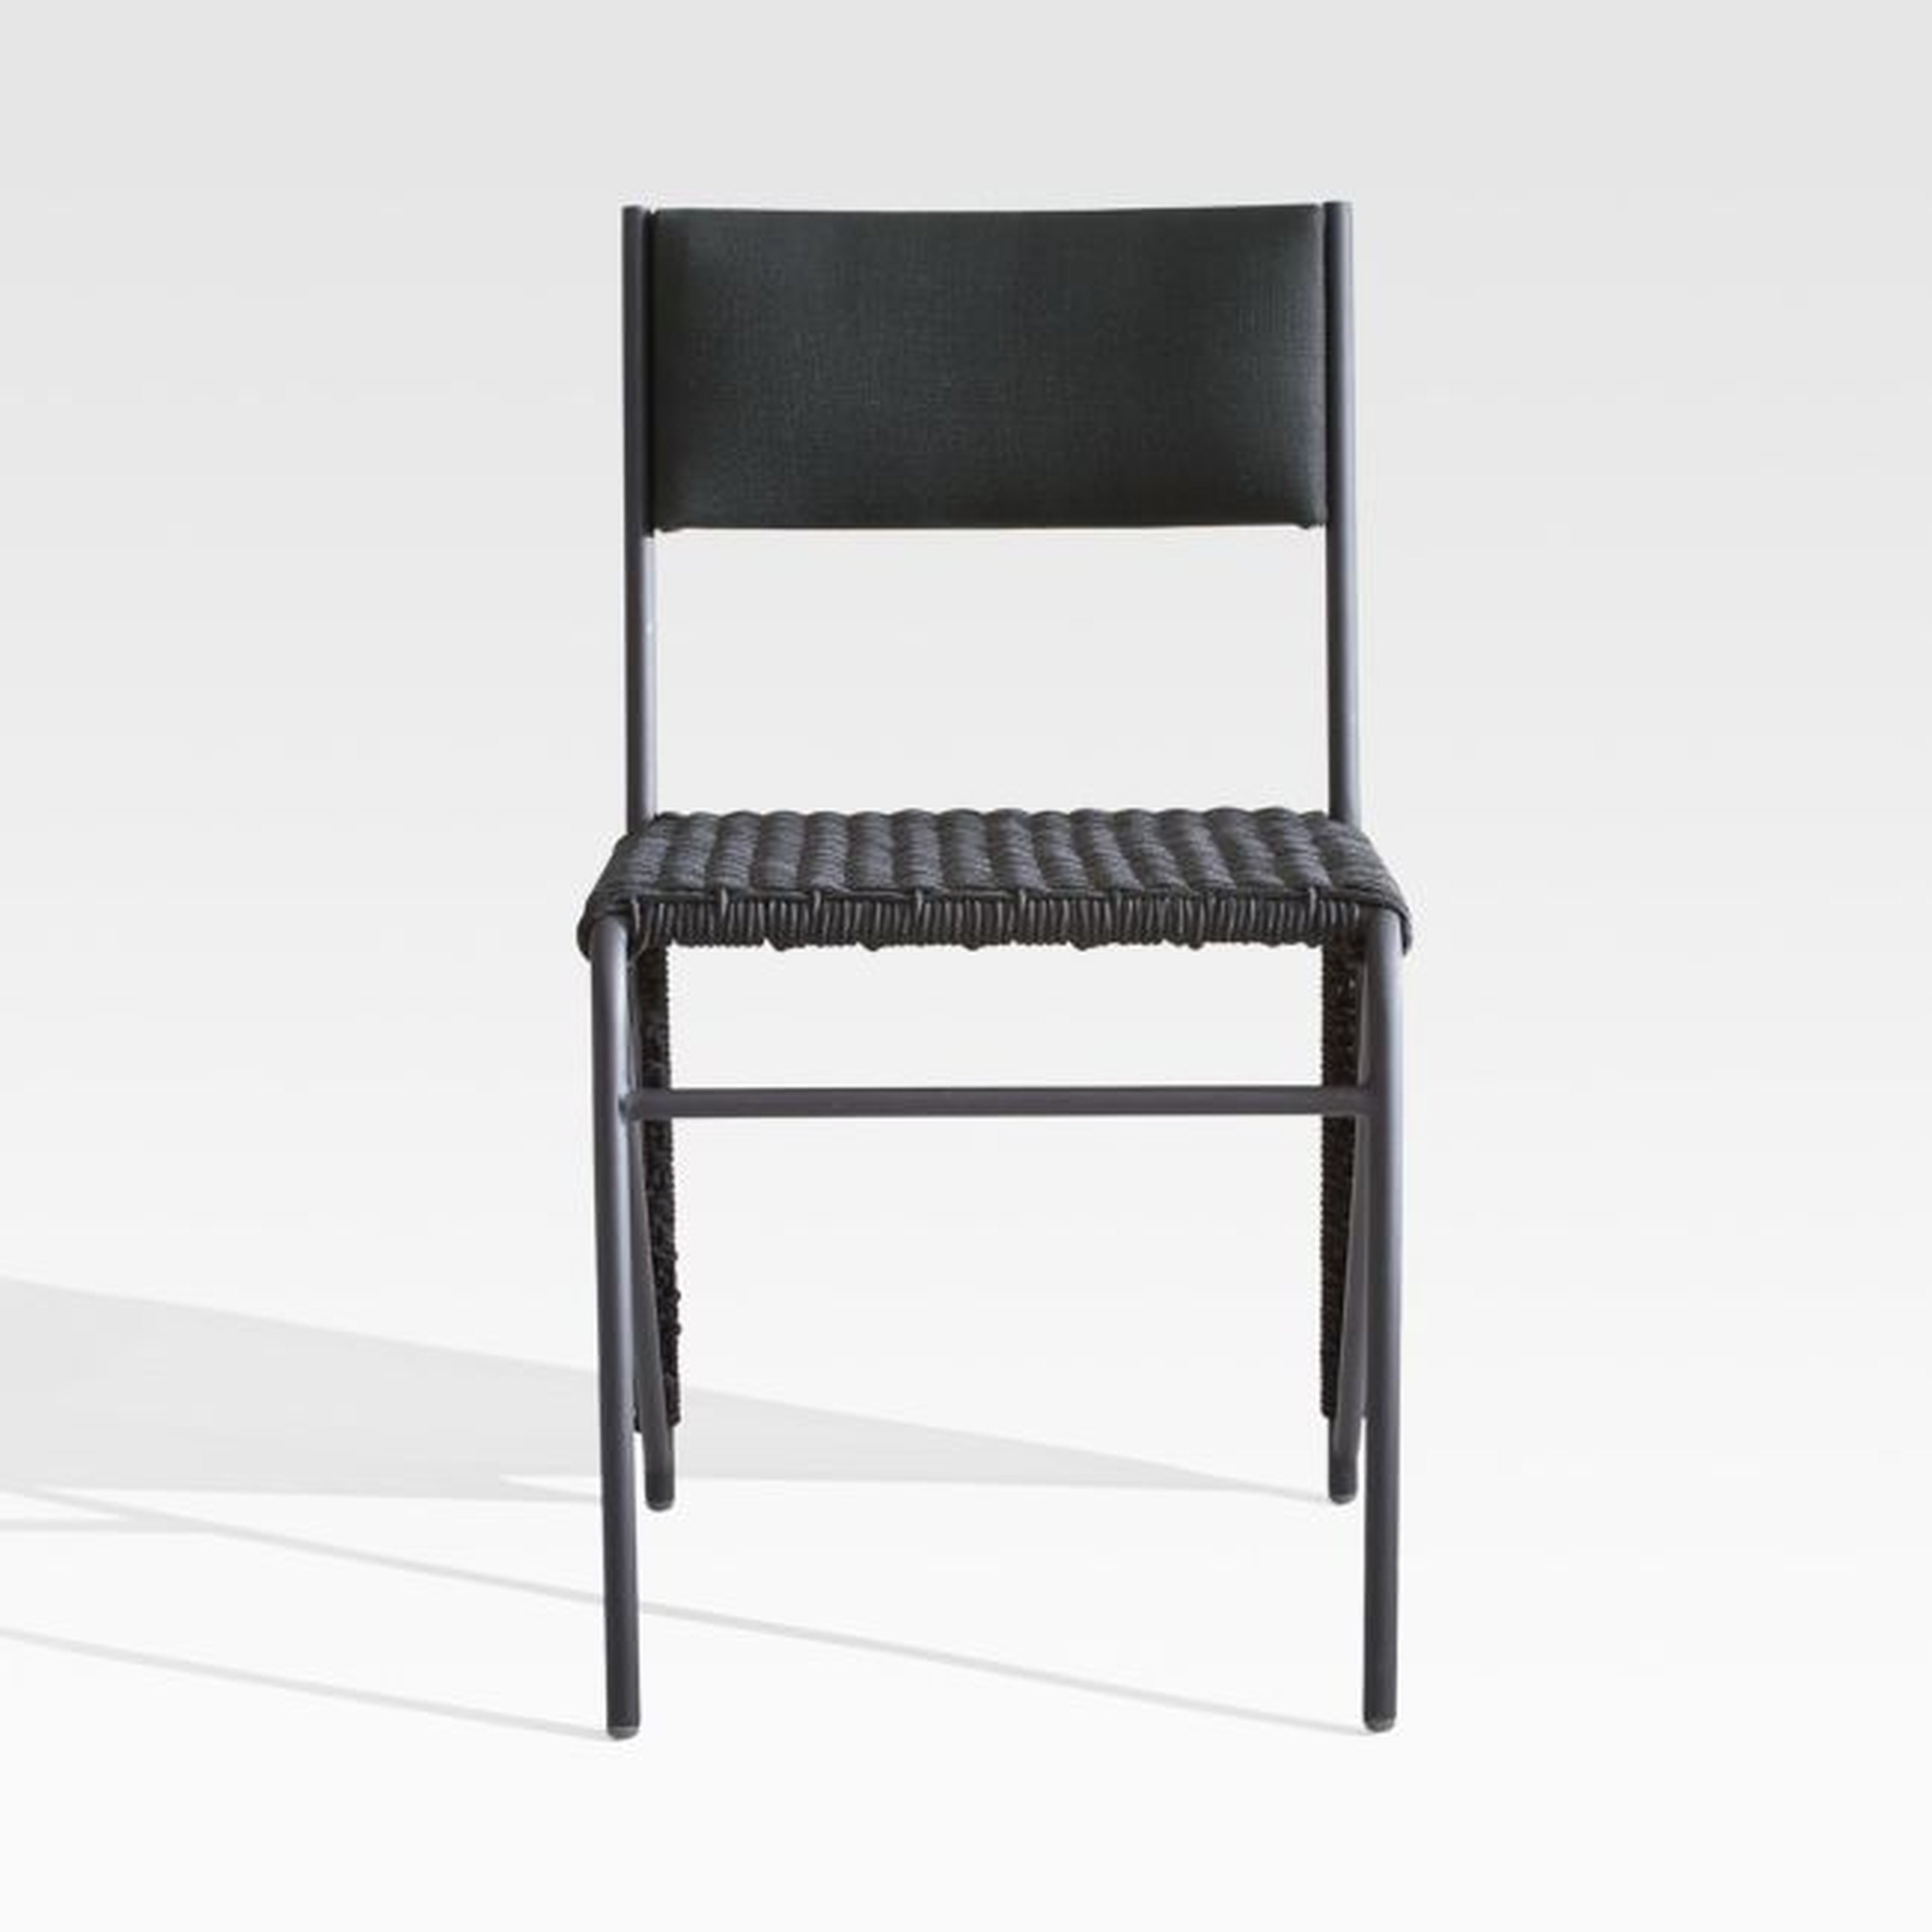 Dorado Black Small Space Outdoor Dining Chair - Crate and Barrel